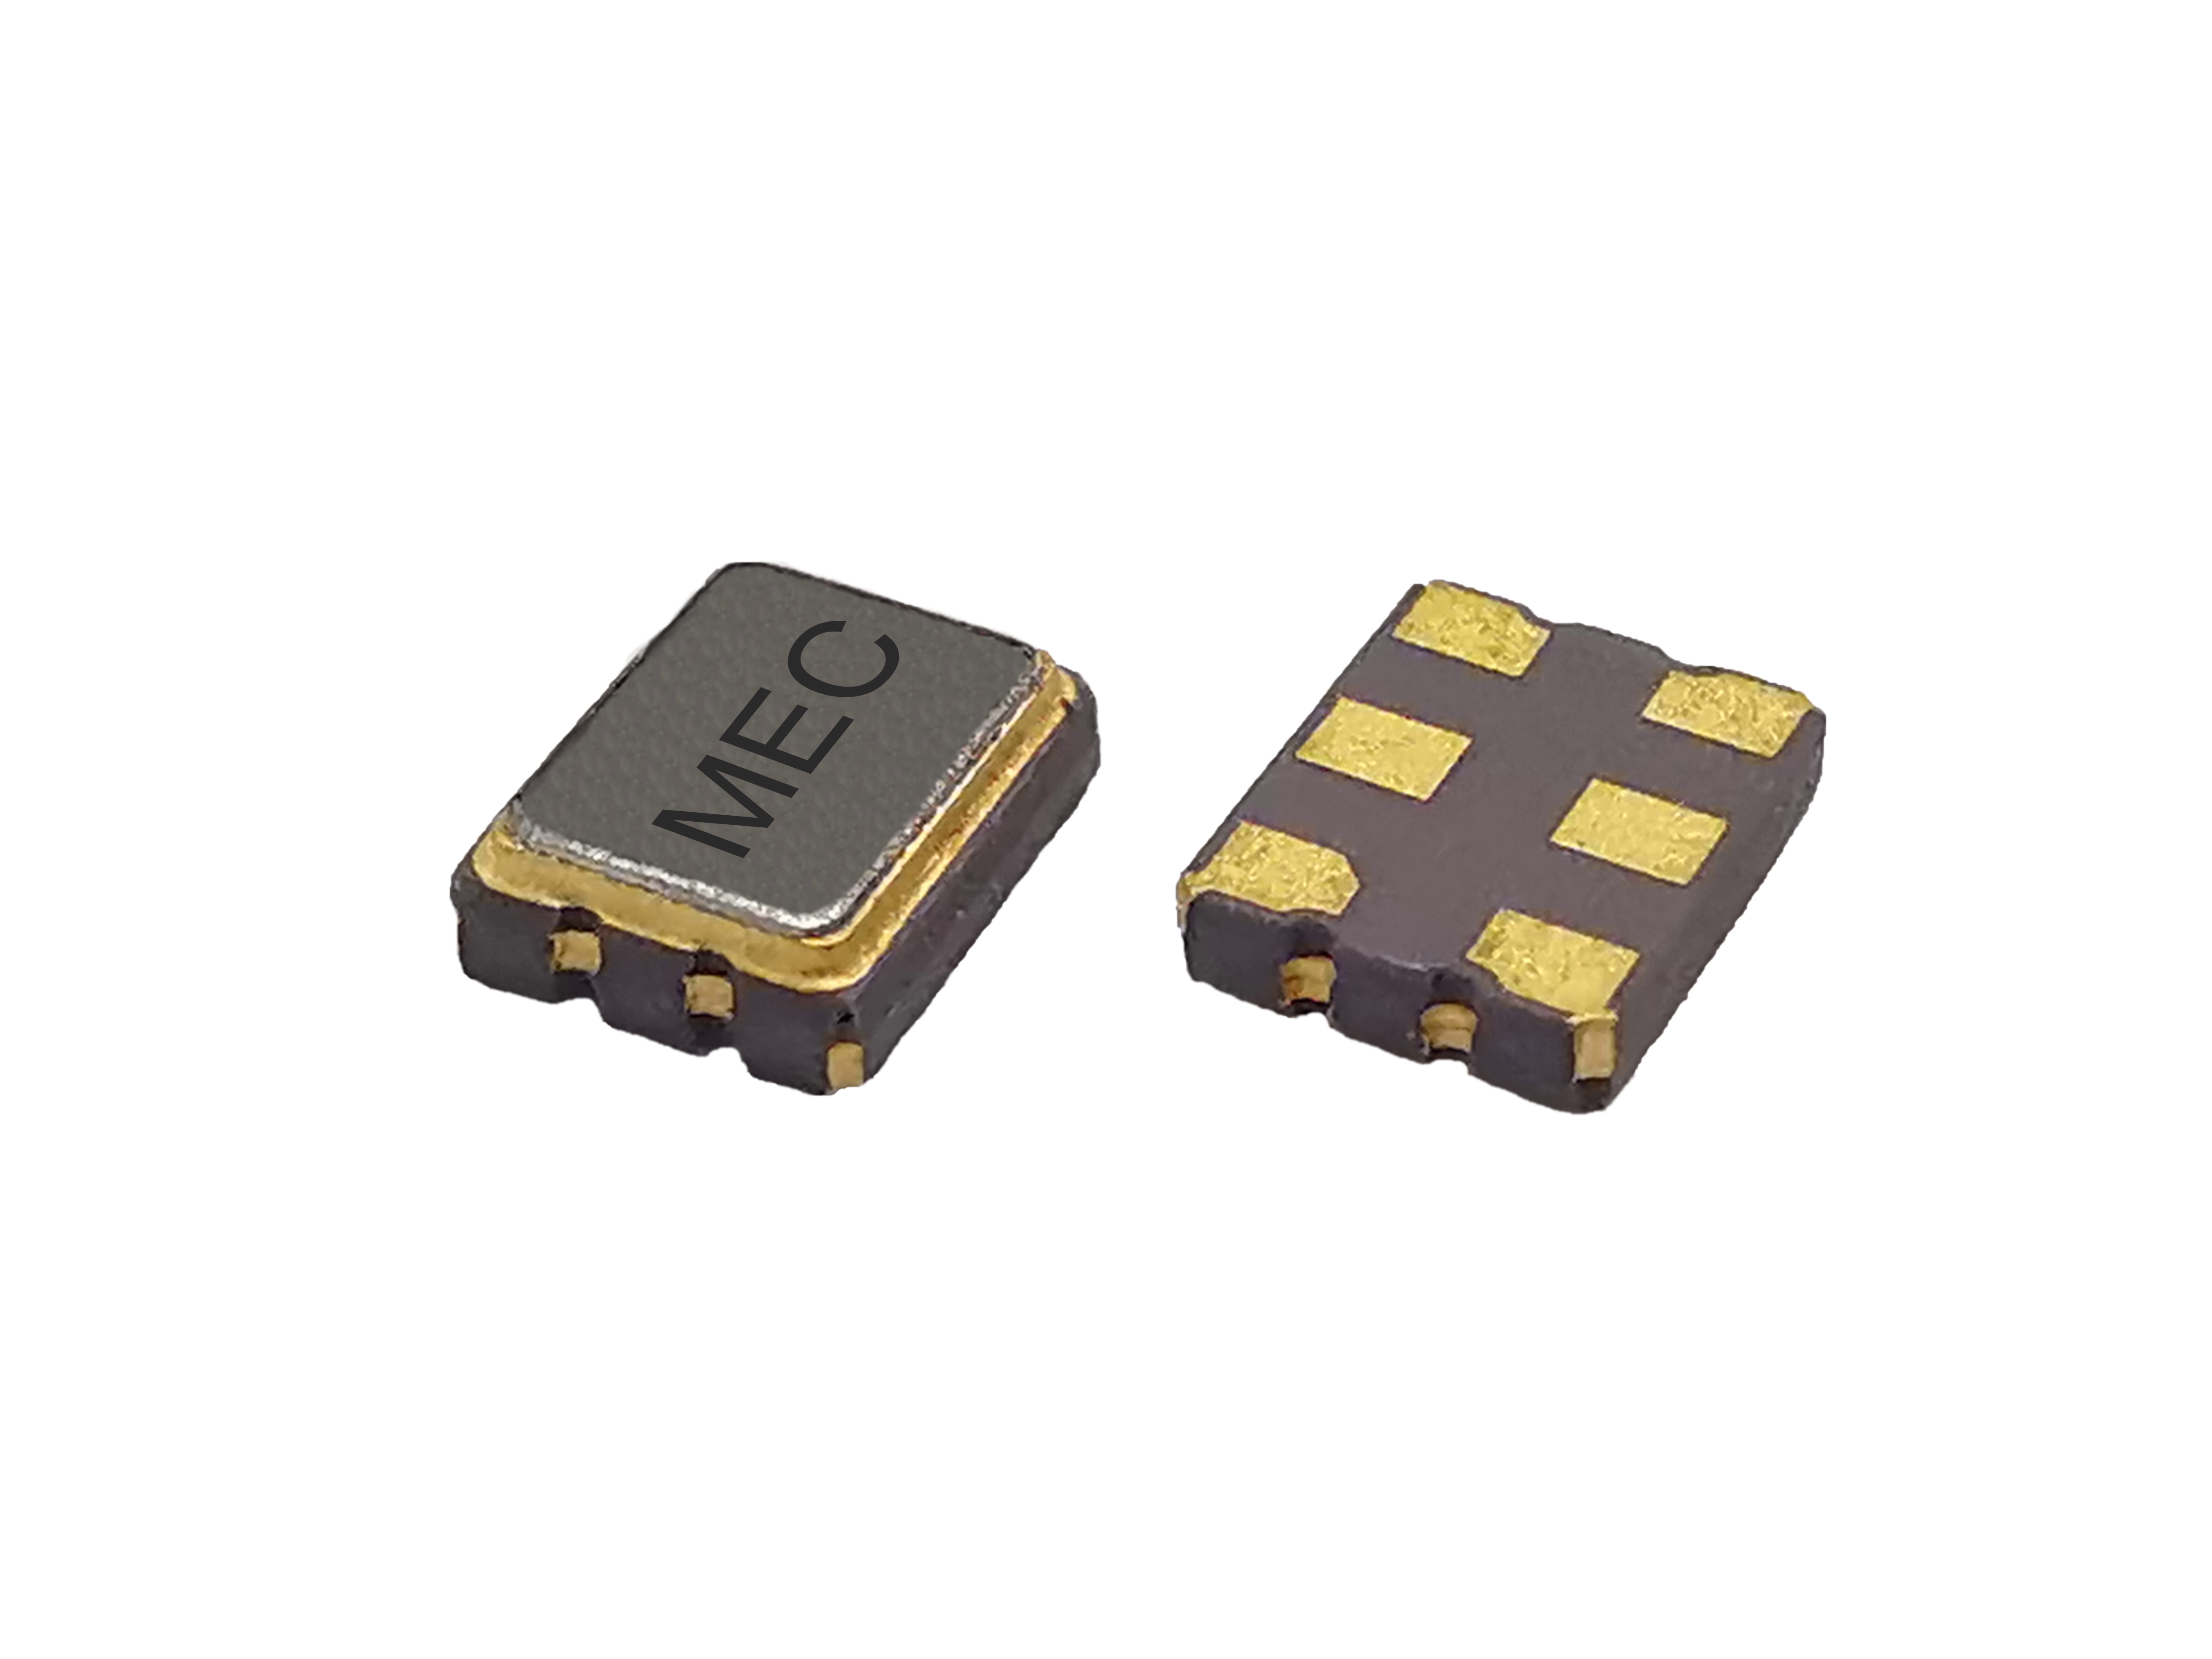 HCTQF326 3225 2.5V Quick-Turn Programmable Frequency Swithable CMOS  SMD Crystal Oscillator